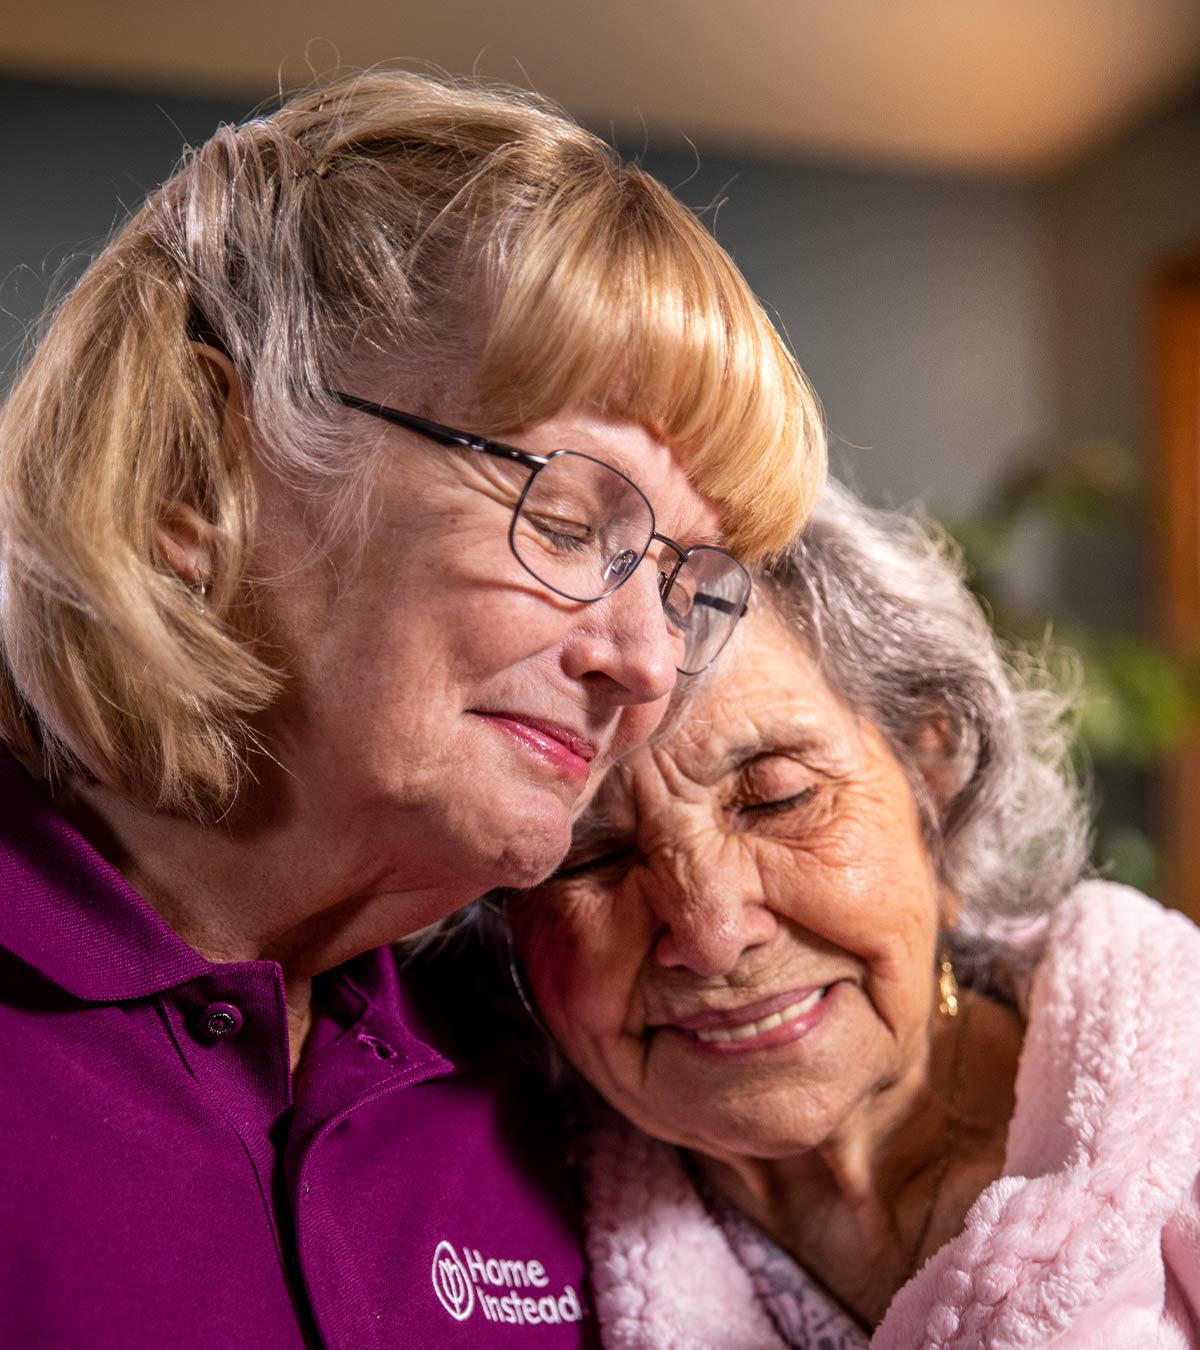 CAREGiver providing in-home senior care services. Home Instead of Tallahassee, FL provides Elder Care to aging adults. 